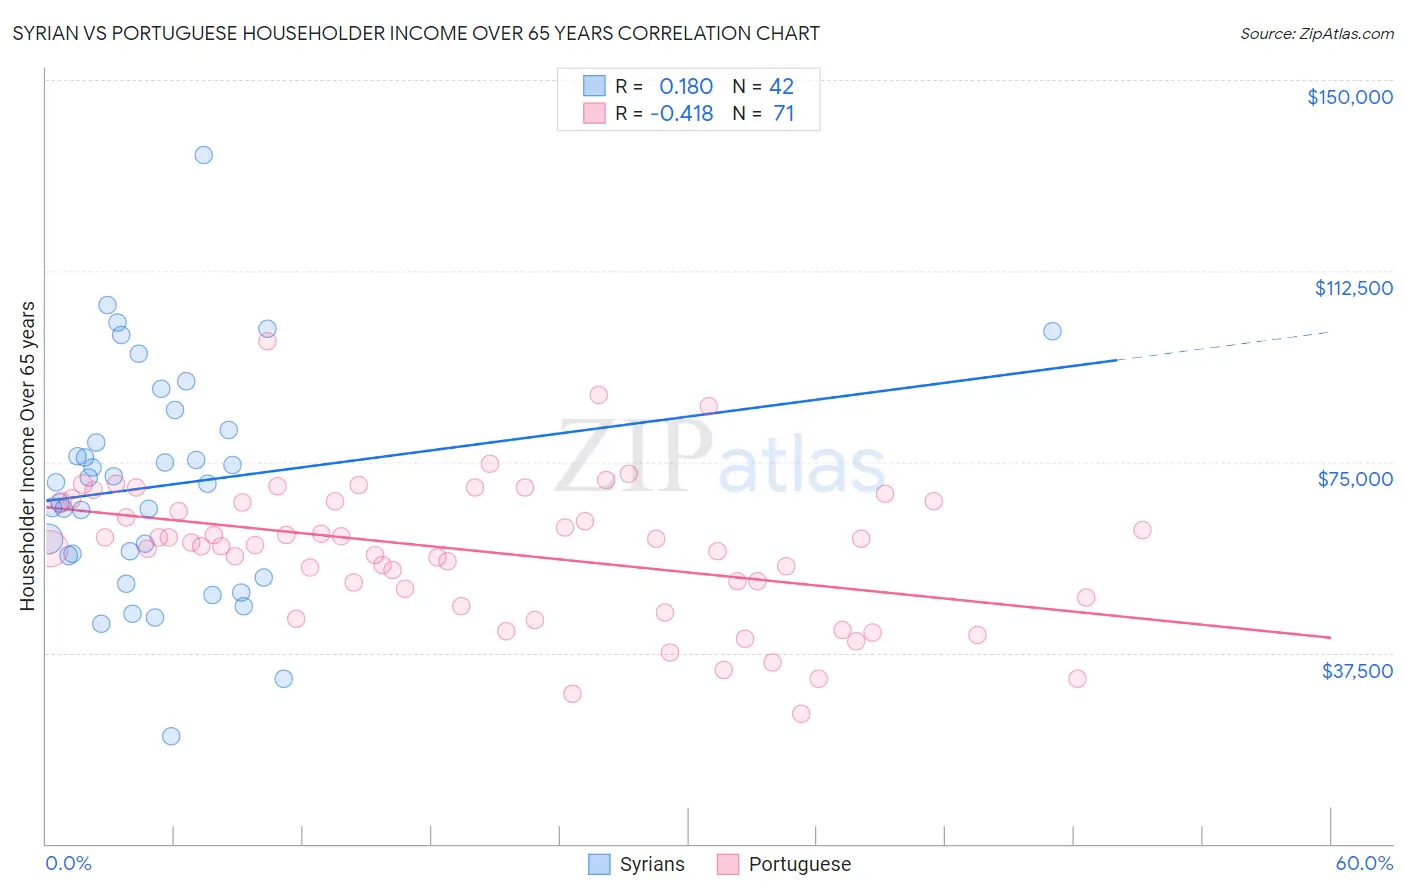 Syrian vs Portuguese Householder Income Over 65 years